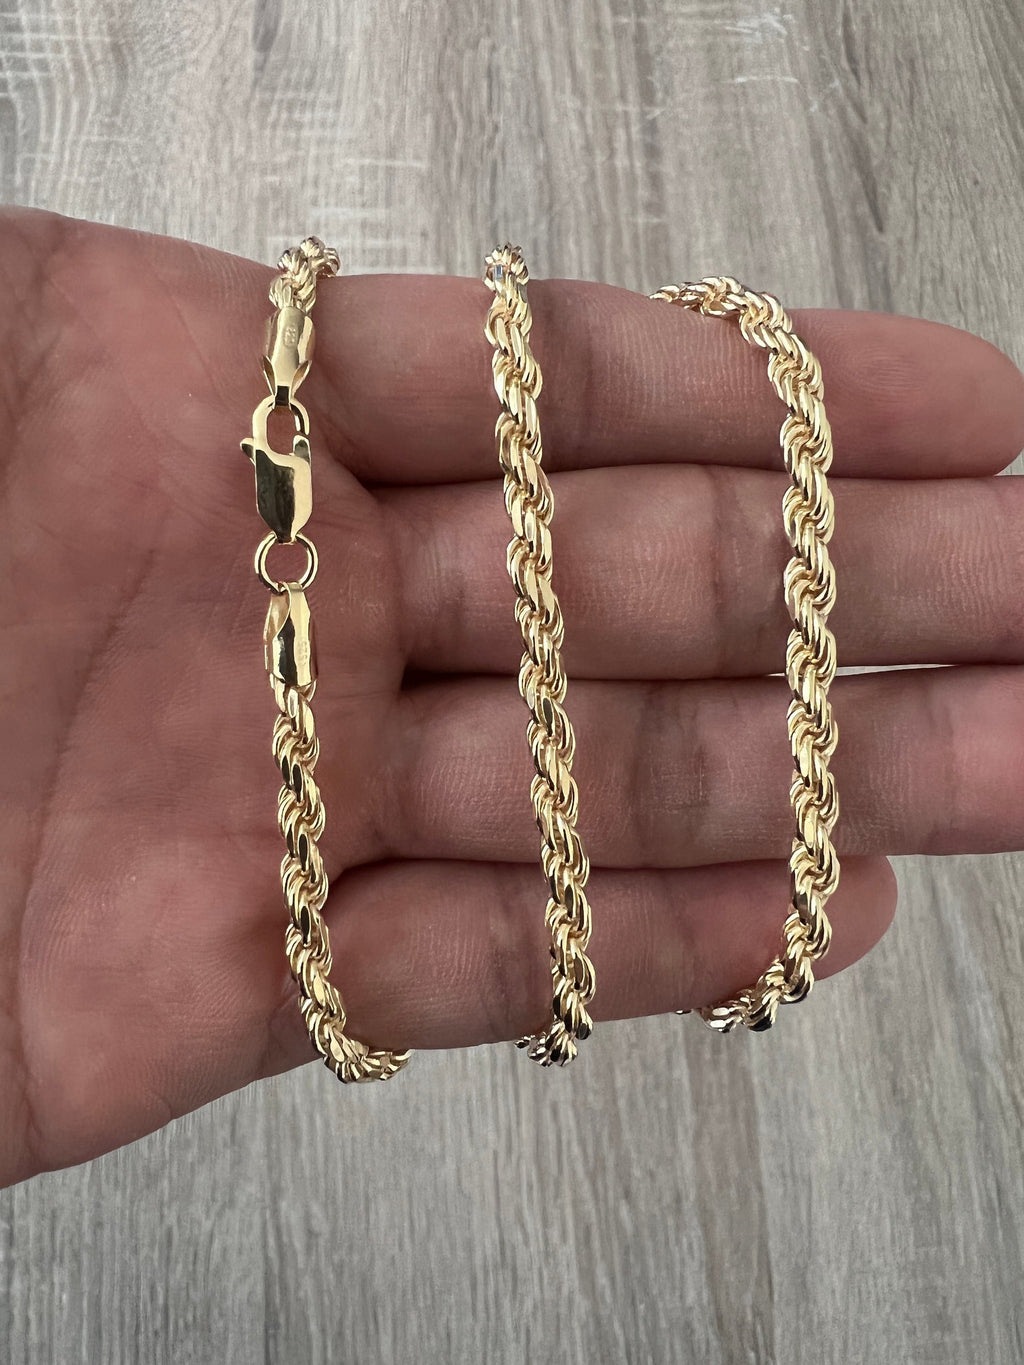 4mm 14k Gold Filled or Sterling Silver Long and Short Oval Chain